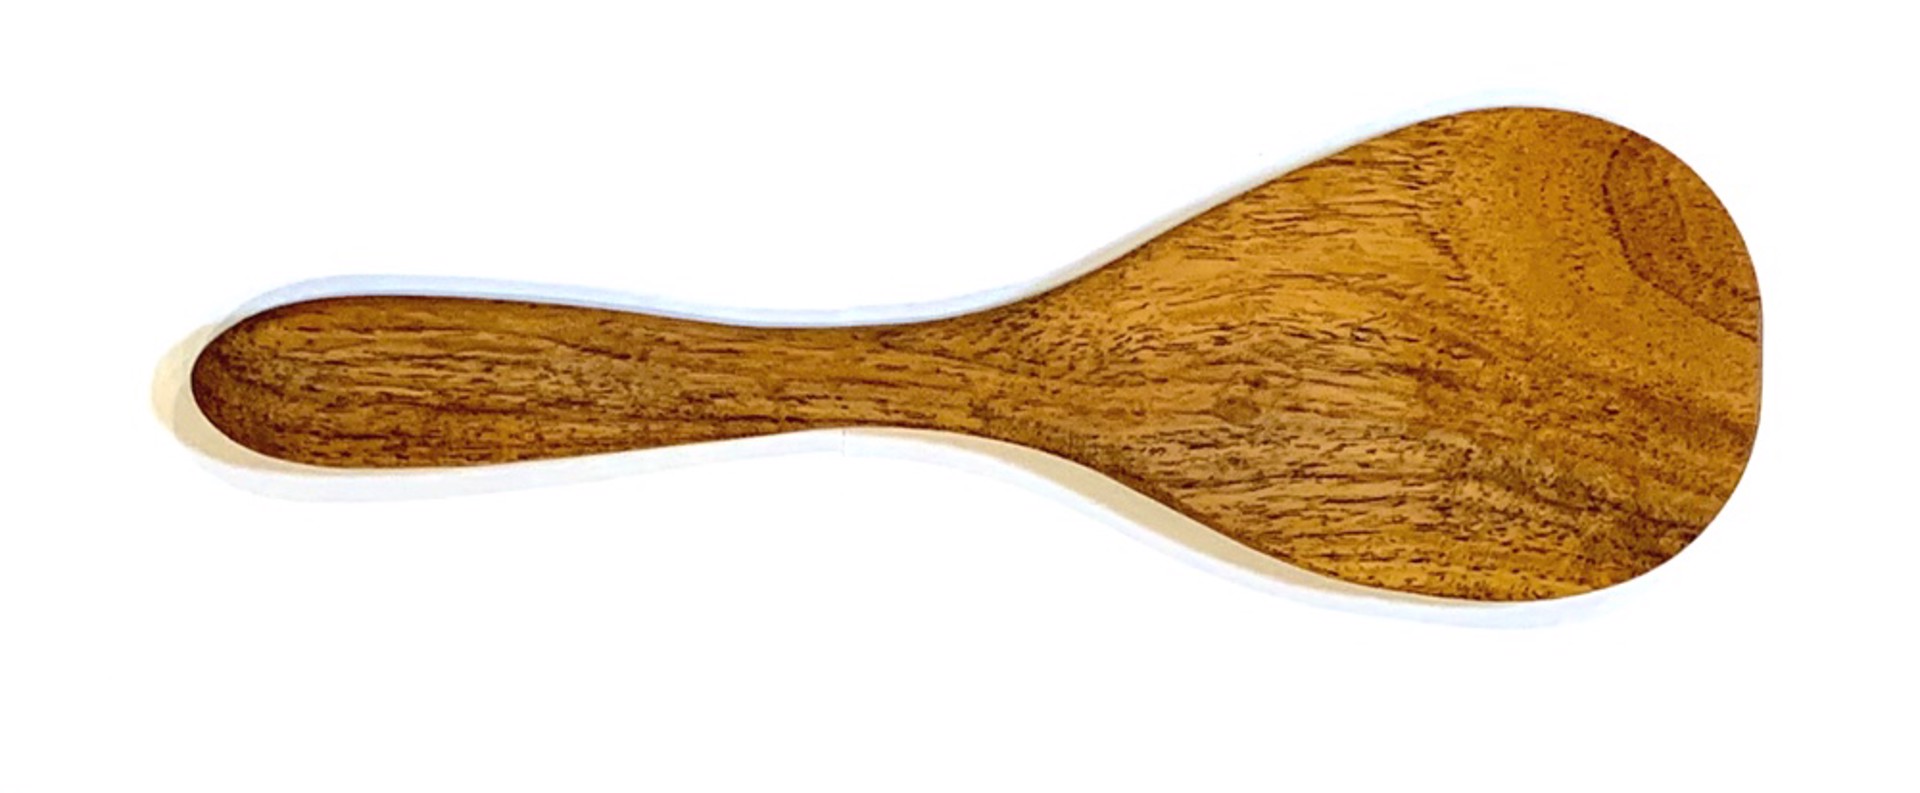 Utensil - Rice Paddle in Mesquite by TreeStump Woodcraft